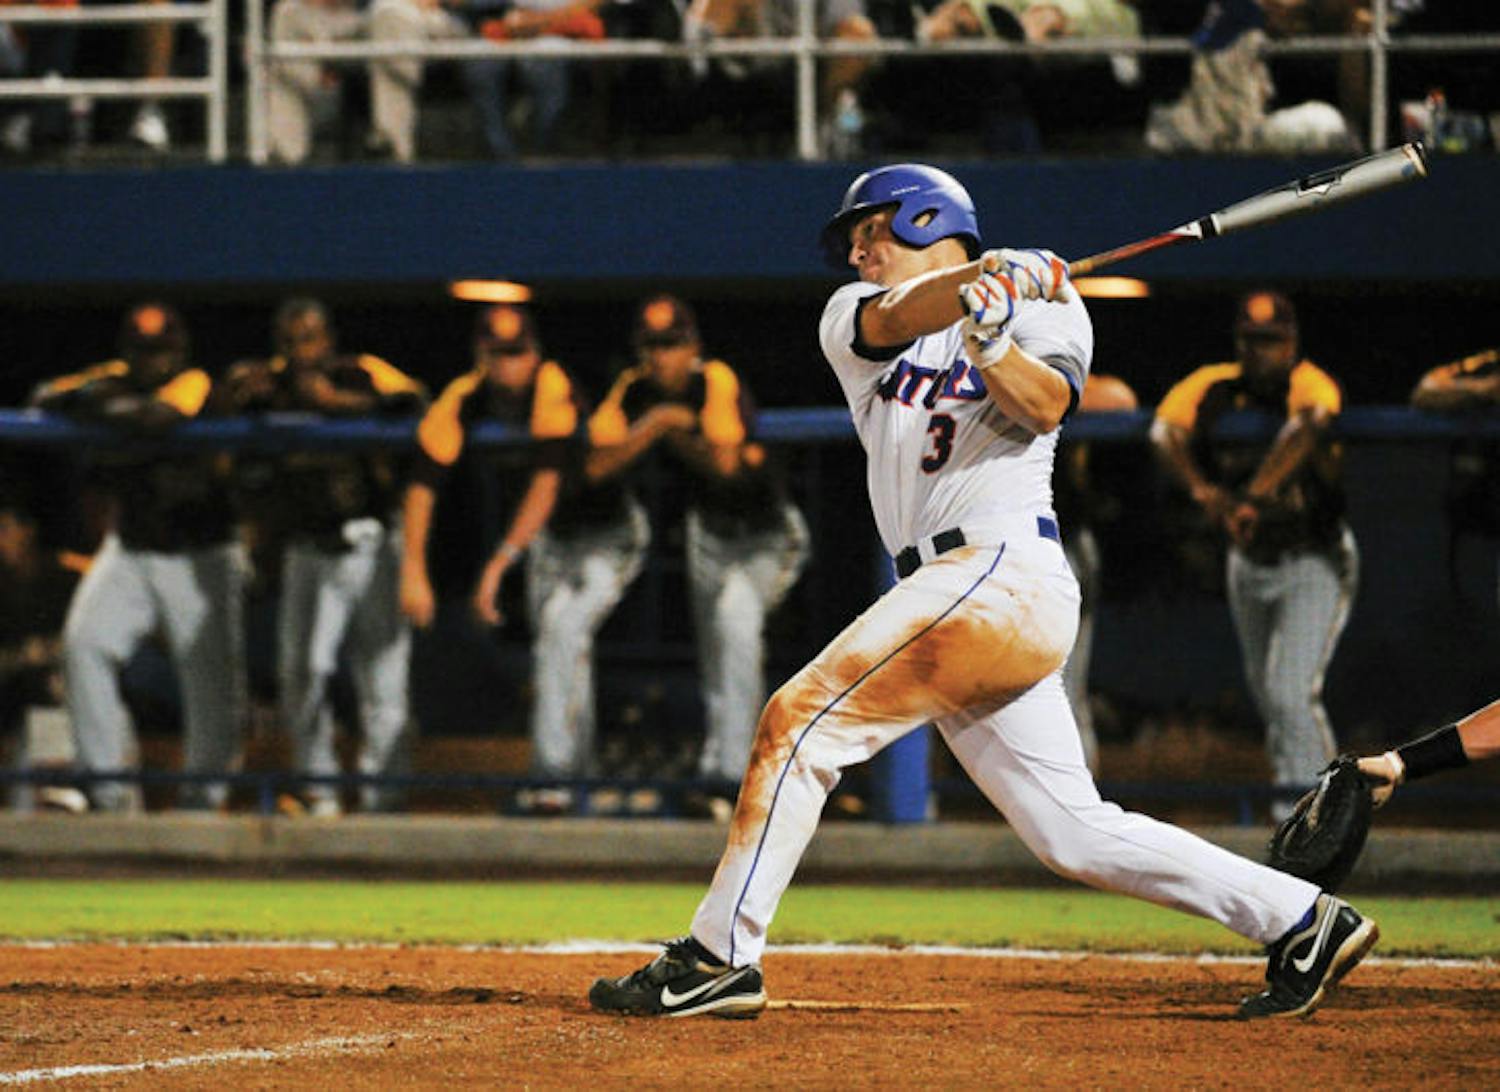 Former UF catcher Mike Zunino swings at a pitch during Florida’s 7-3 win against Bethune-Cookman at McKethan Stadium on June 4, 2010.&nbsp;